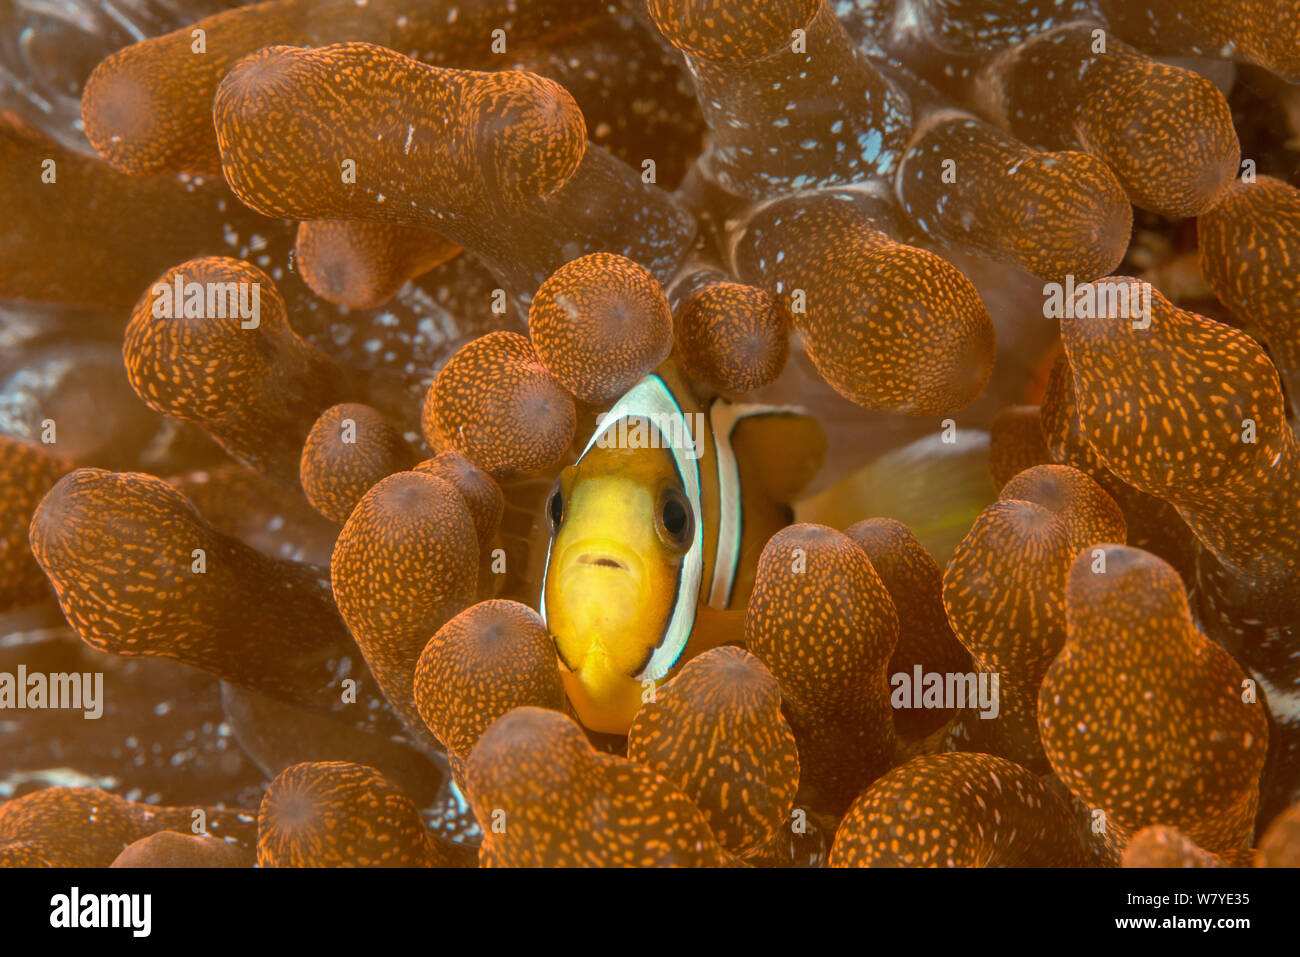 Clark&#39;s anemonefish (Amphiprion clarkii) unusual yellow form in  its host Bubble-tip Anemone (Entacmaea quadricolor). Lembeh Strait, North Sulawesi, Indonesia. Stock Photo